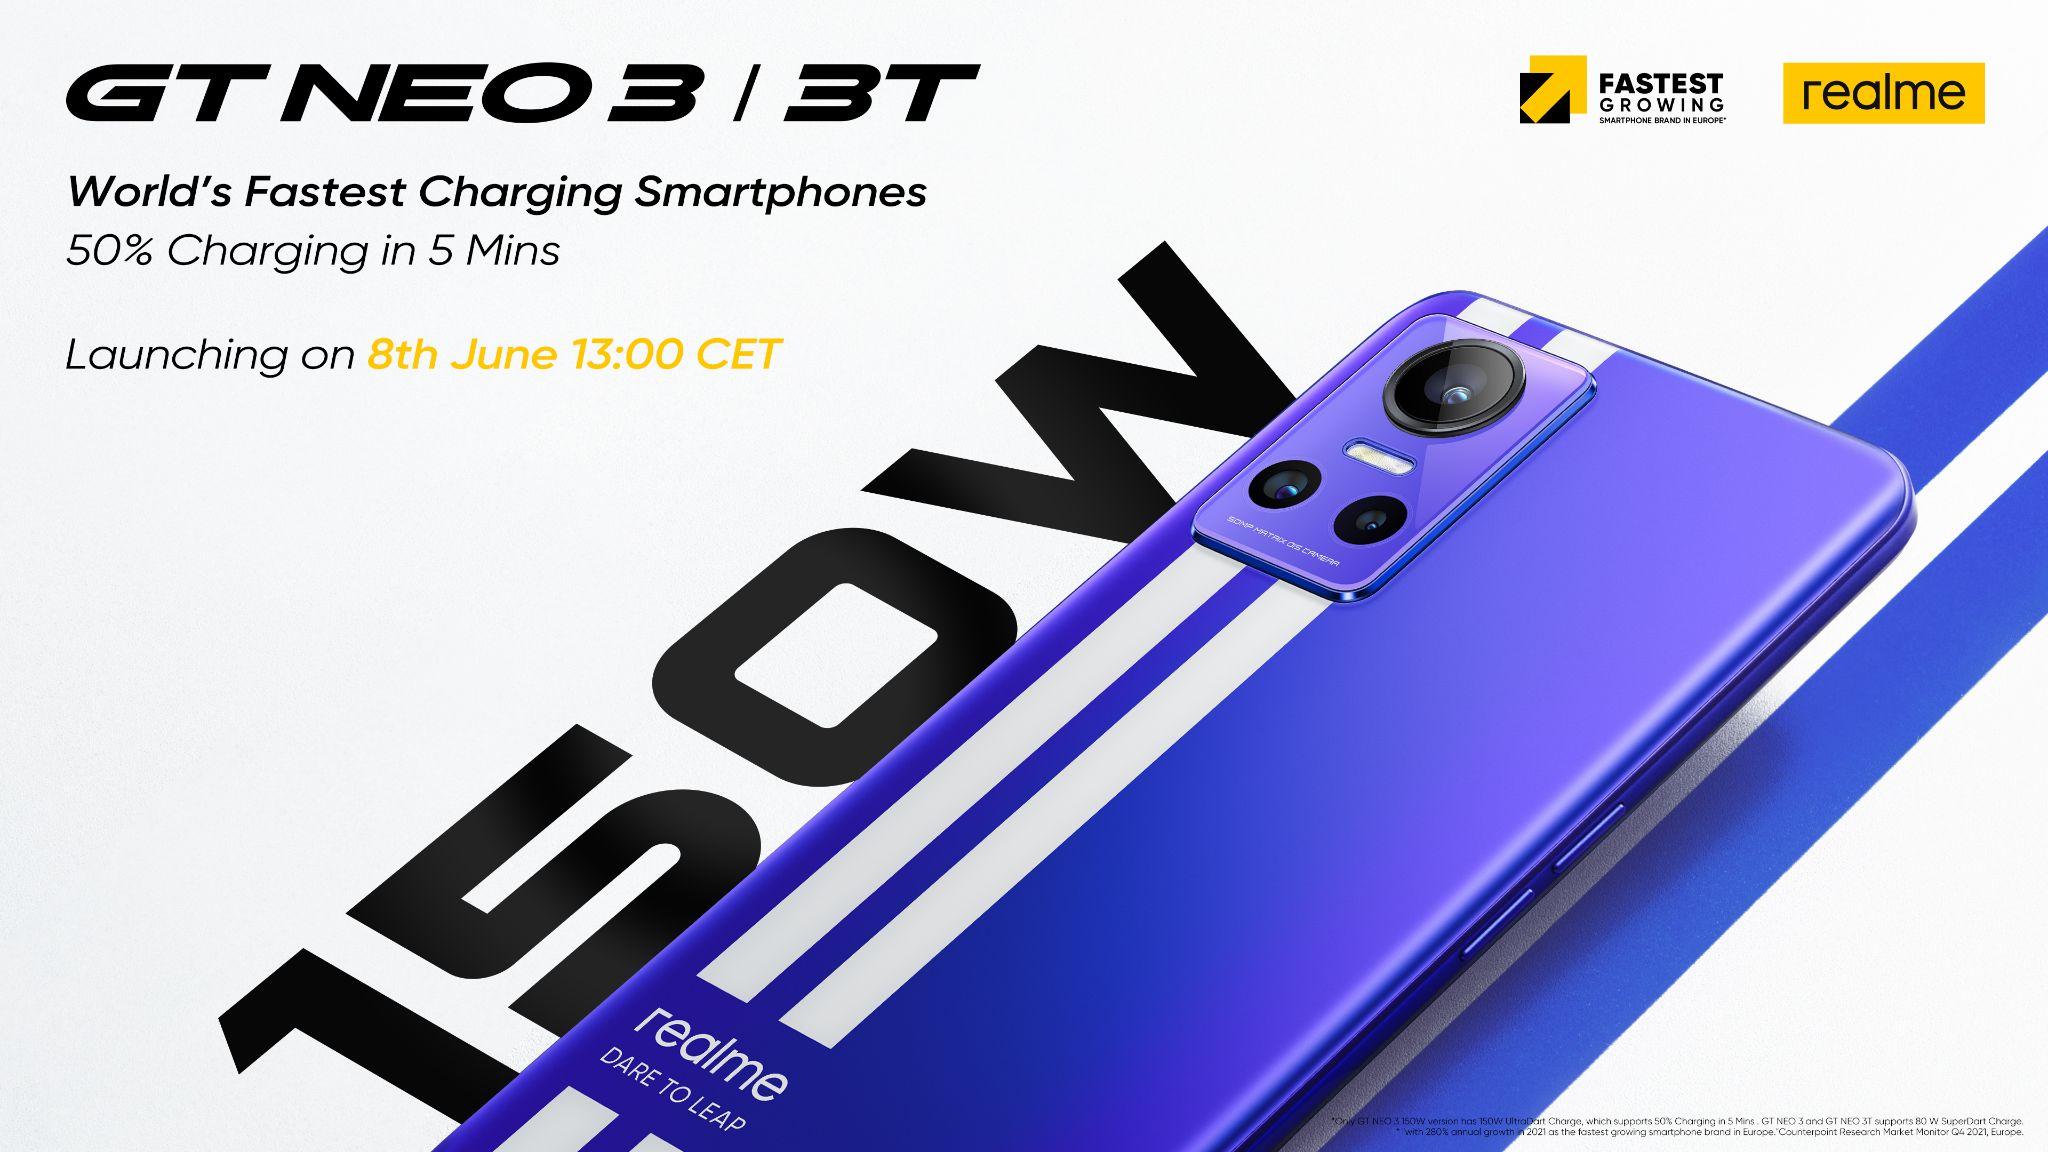 The realme GT NEO 3 is ready for its debut in Italy: the 150 W thumbnail recharge is among the specifications